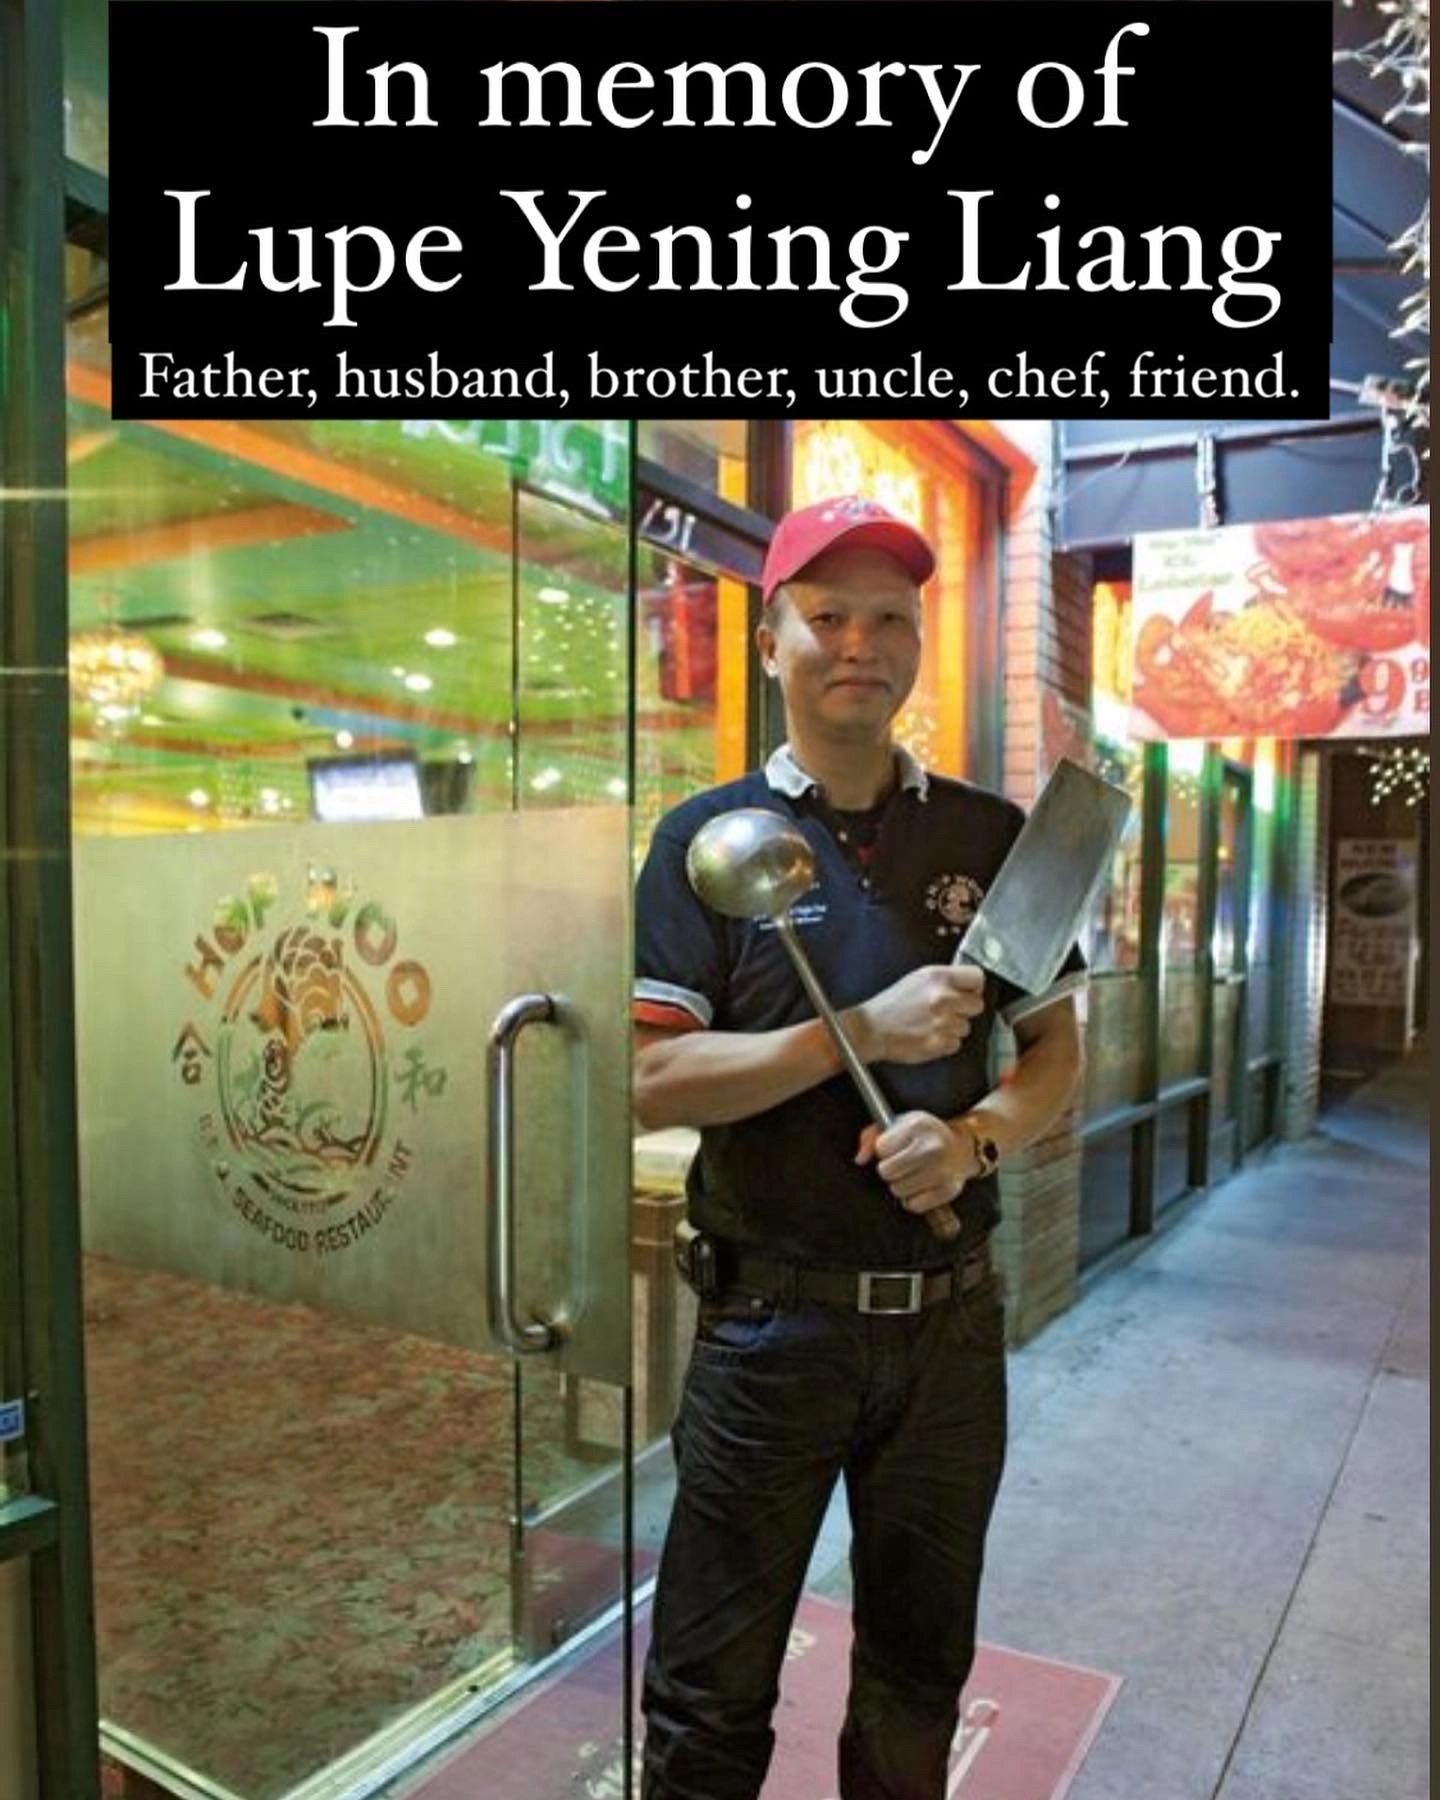 Lupe Yening Liang, father, husband, brother, uncle, chef, friend. Chef Lupe with cooking tools